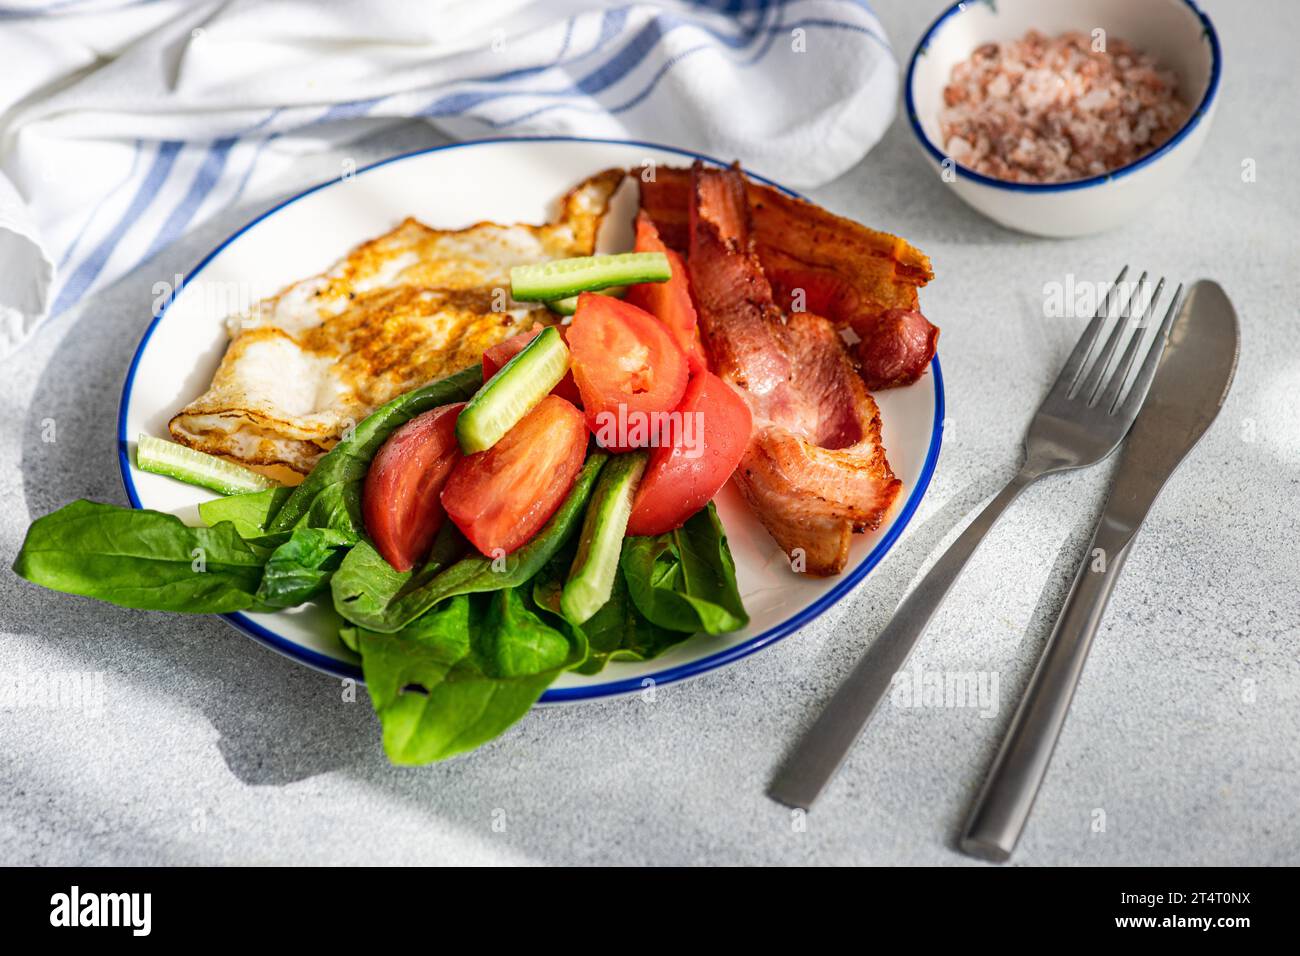 Close-up of a fried egg with bacon, spinach, tomato, cucumber and pink Himalayan salt Stock Photo